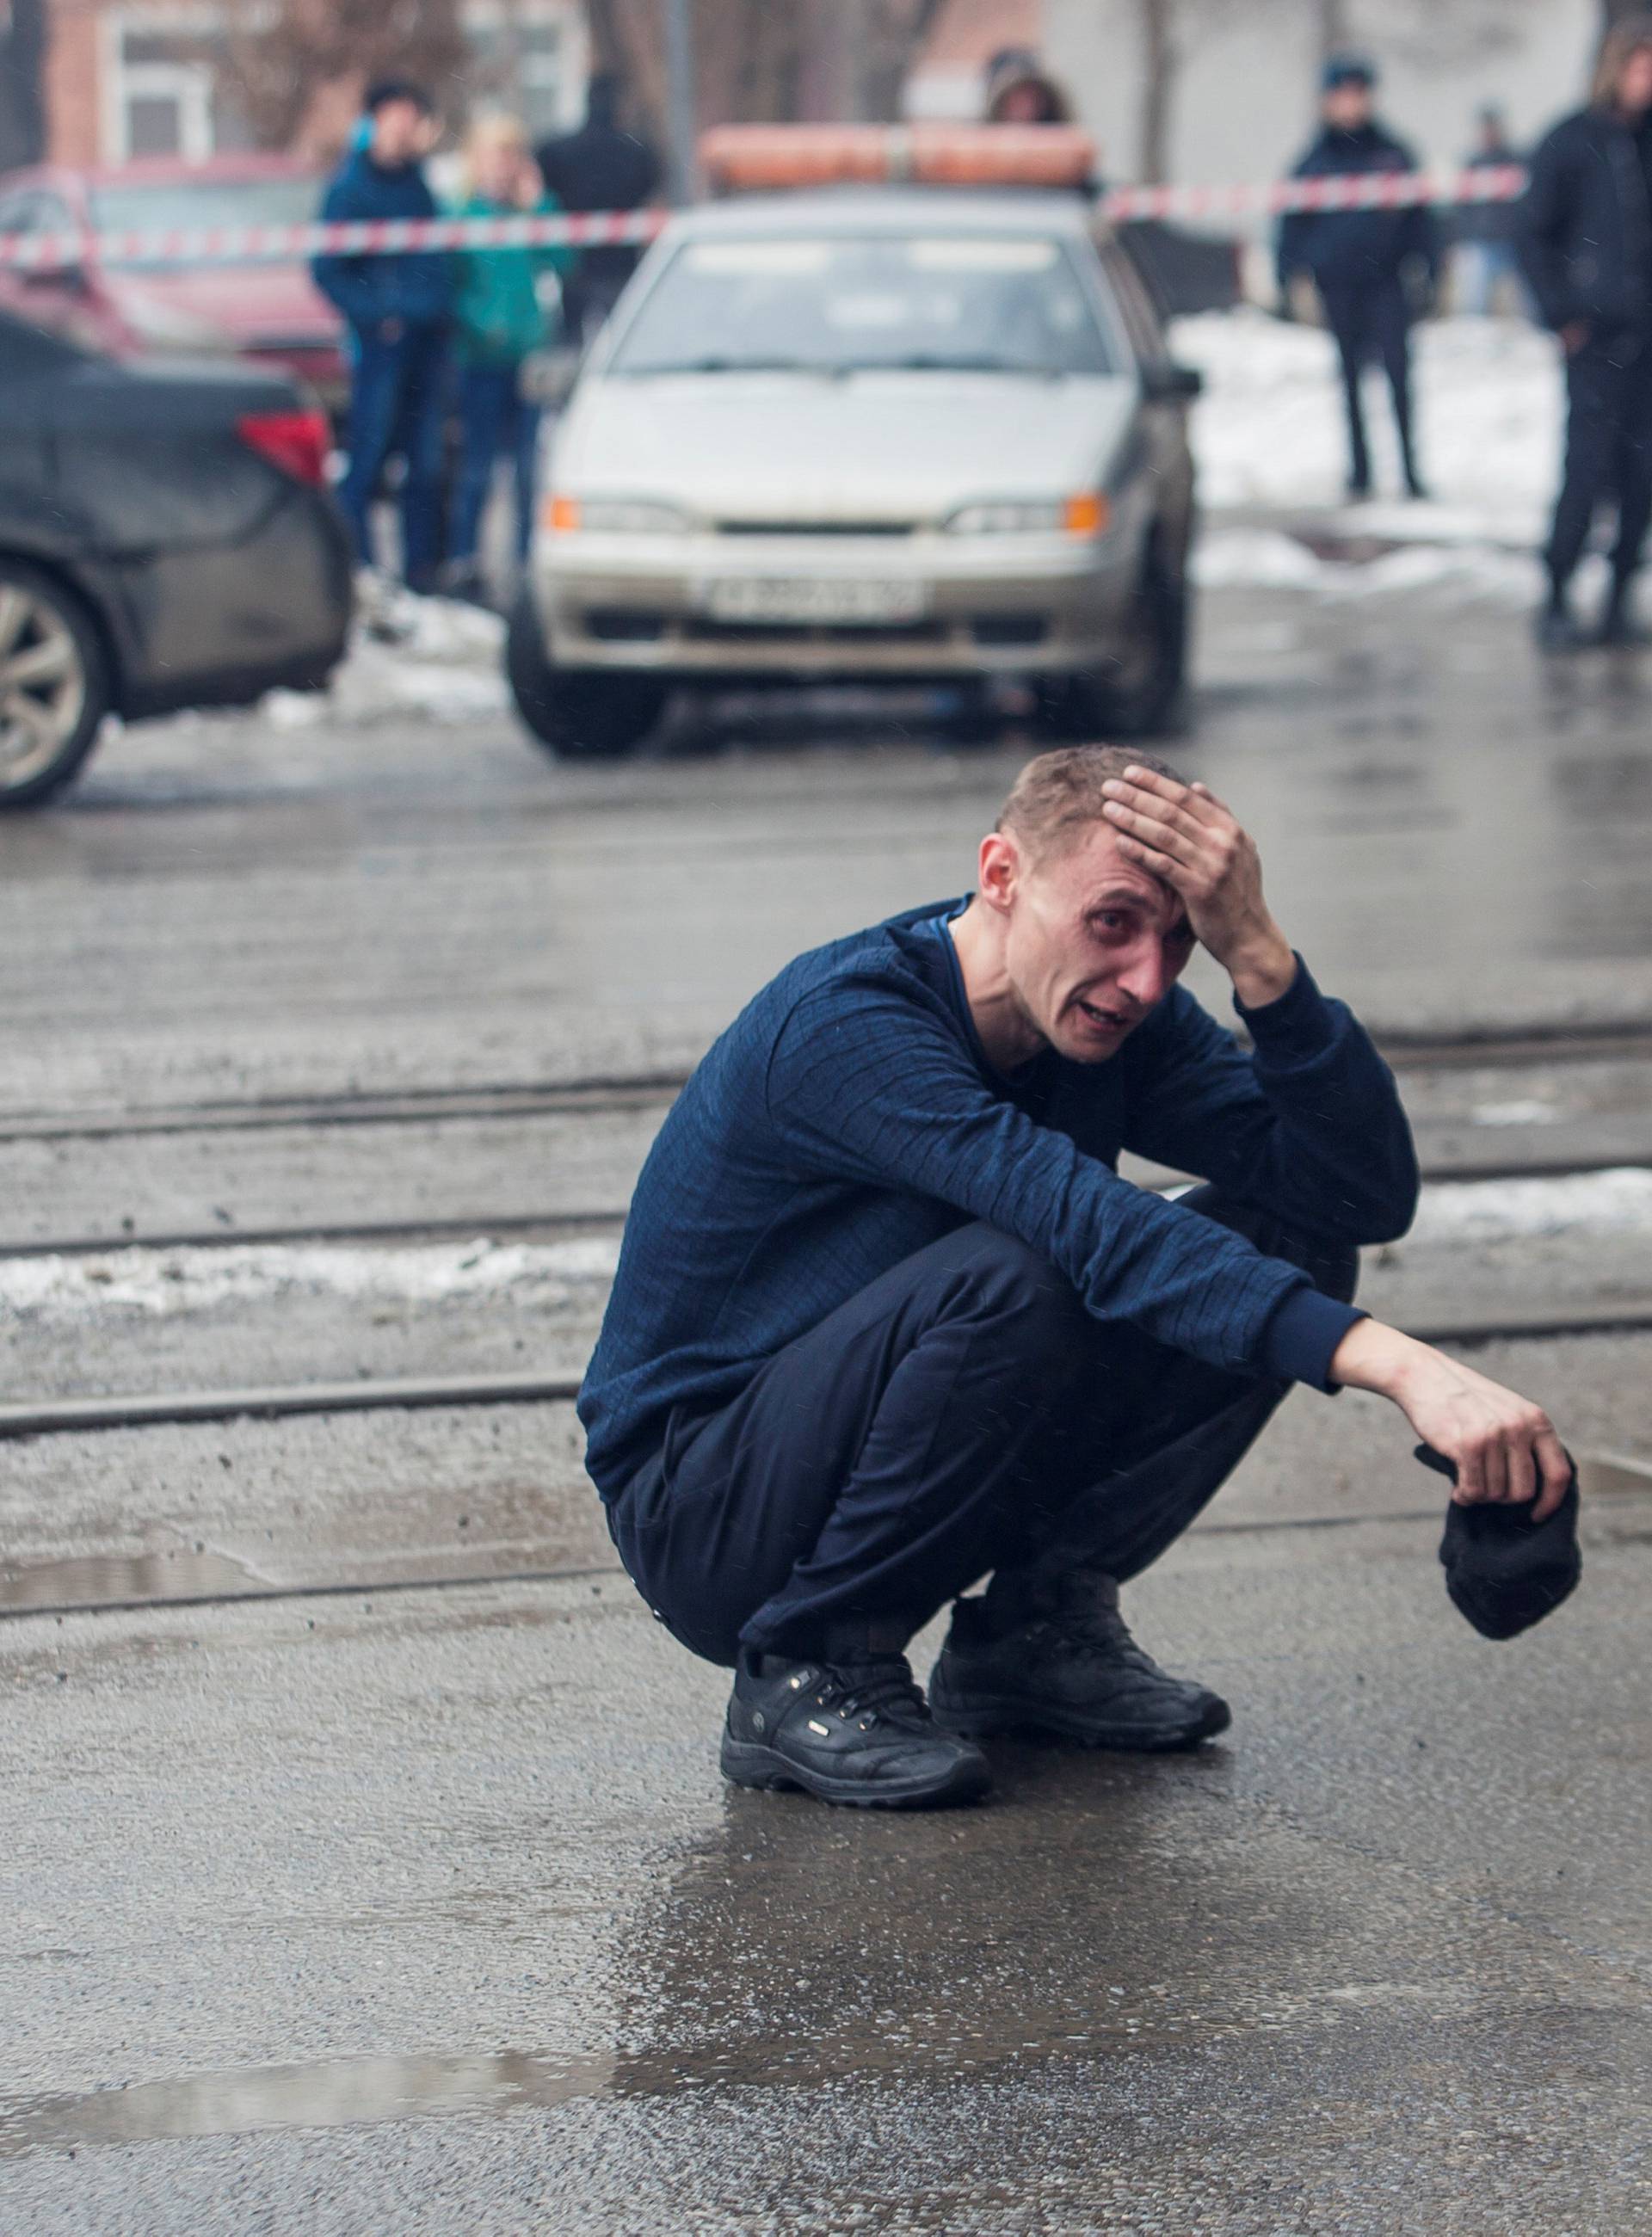 A man reacts at the scene of a fire in a shopping mall in Kemerovo